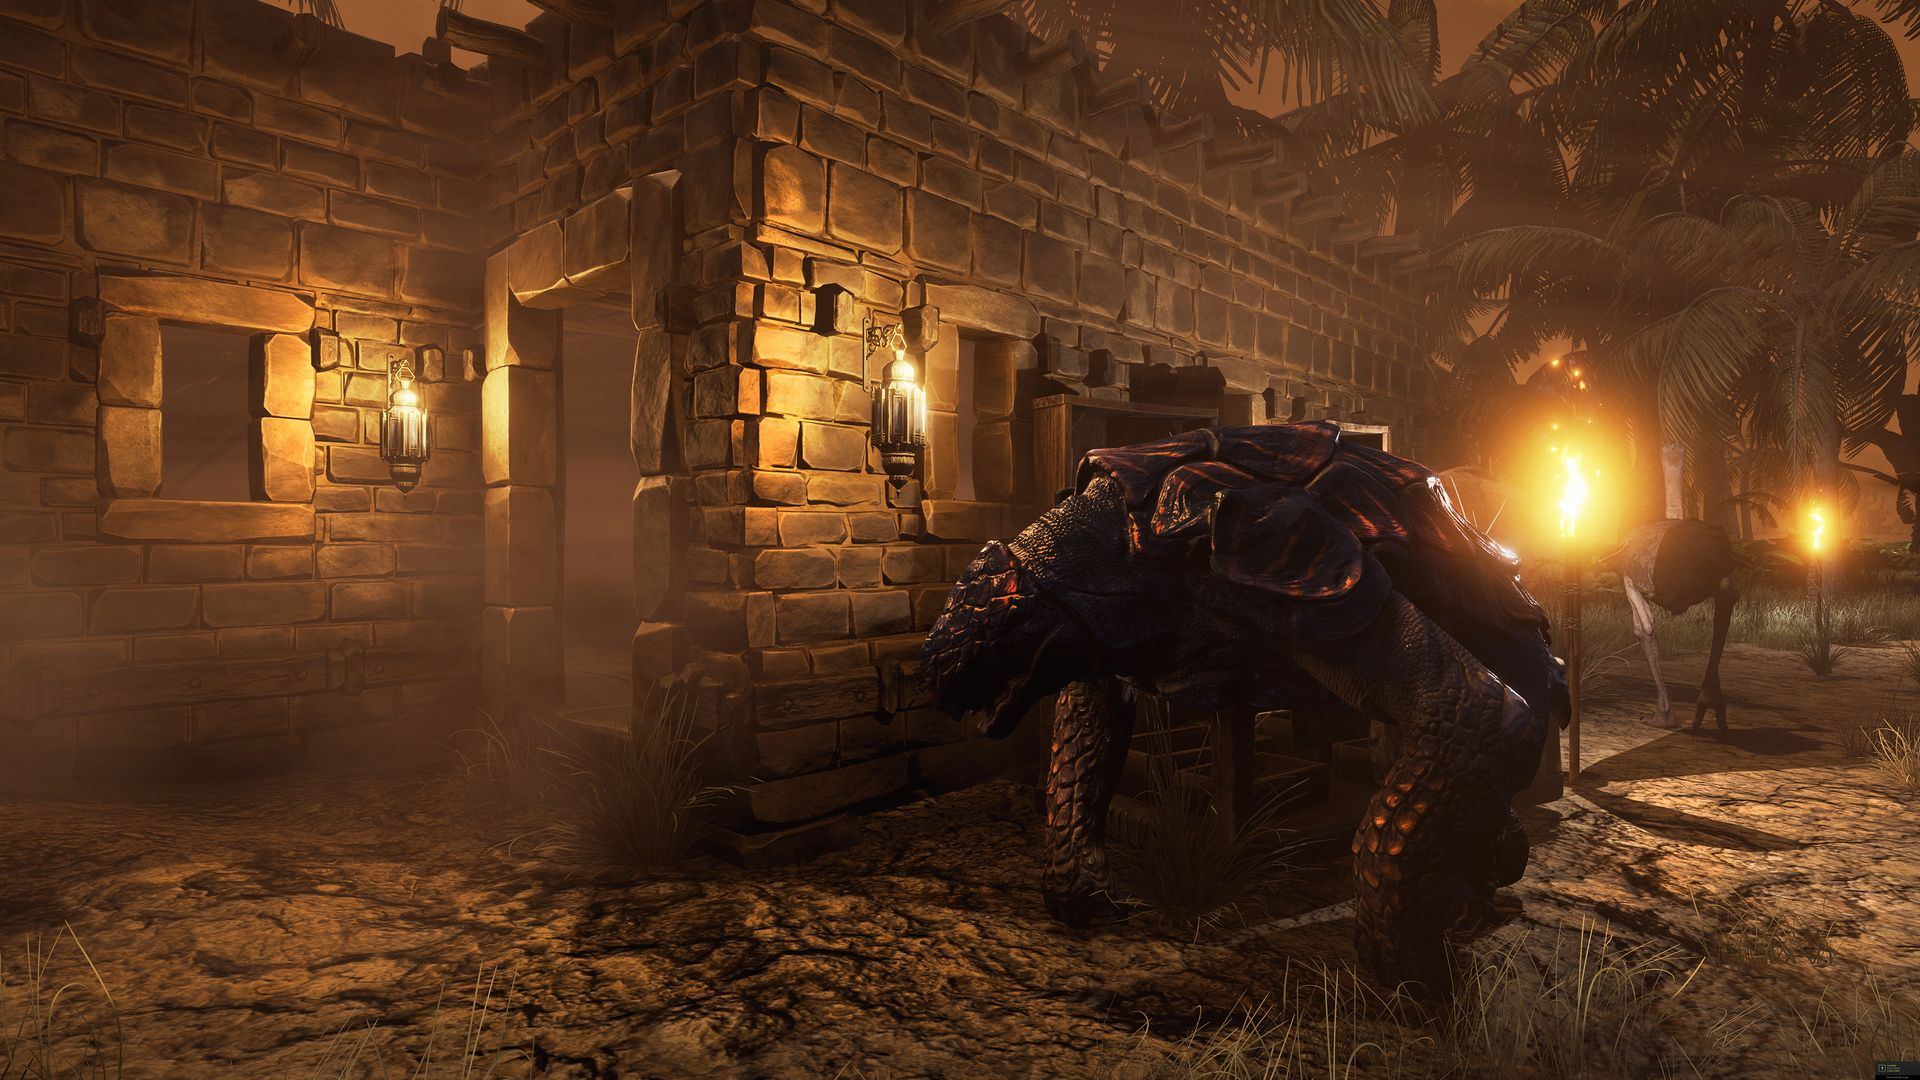 conan-exiles-improved-visuals-look-stunning-8